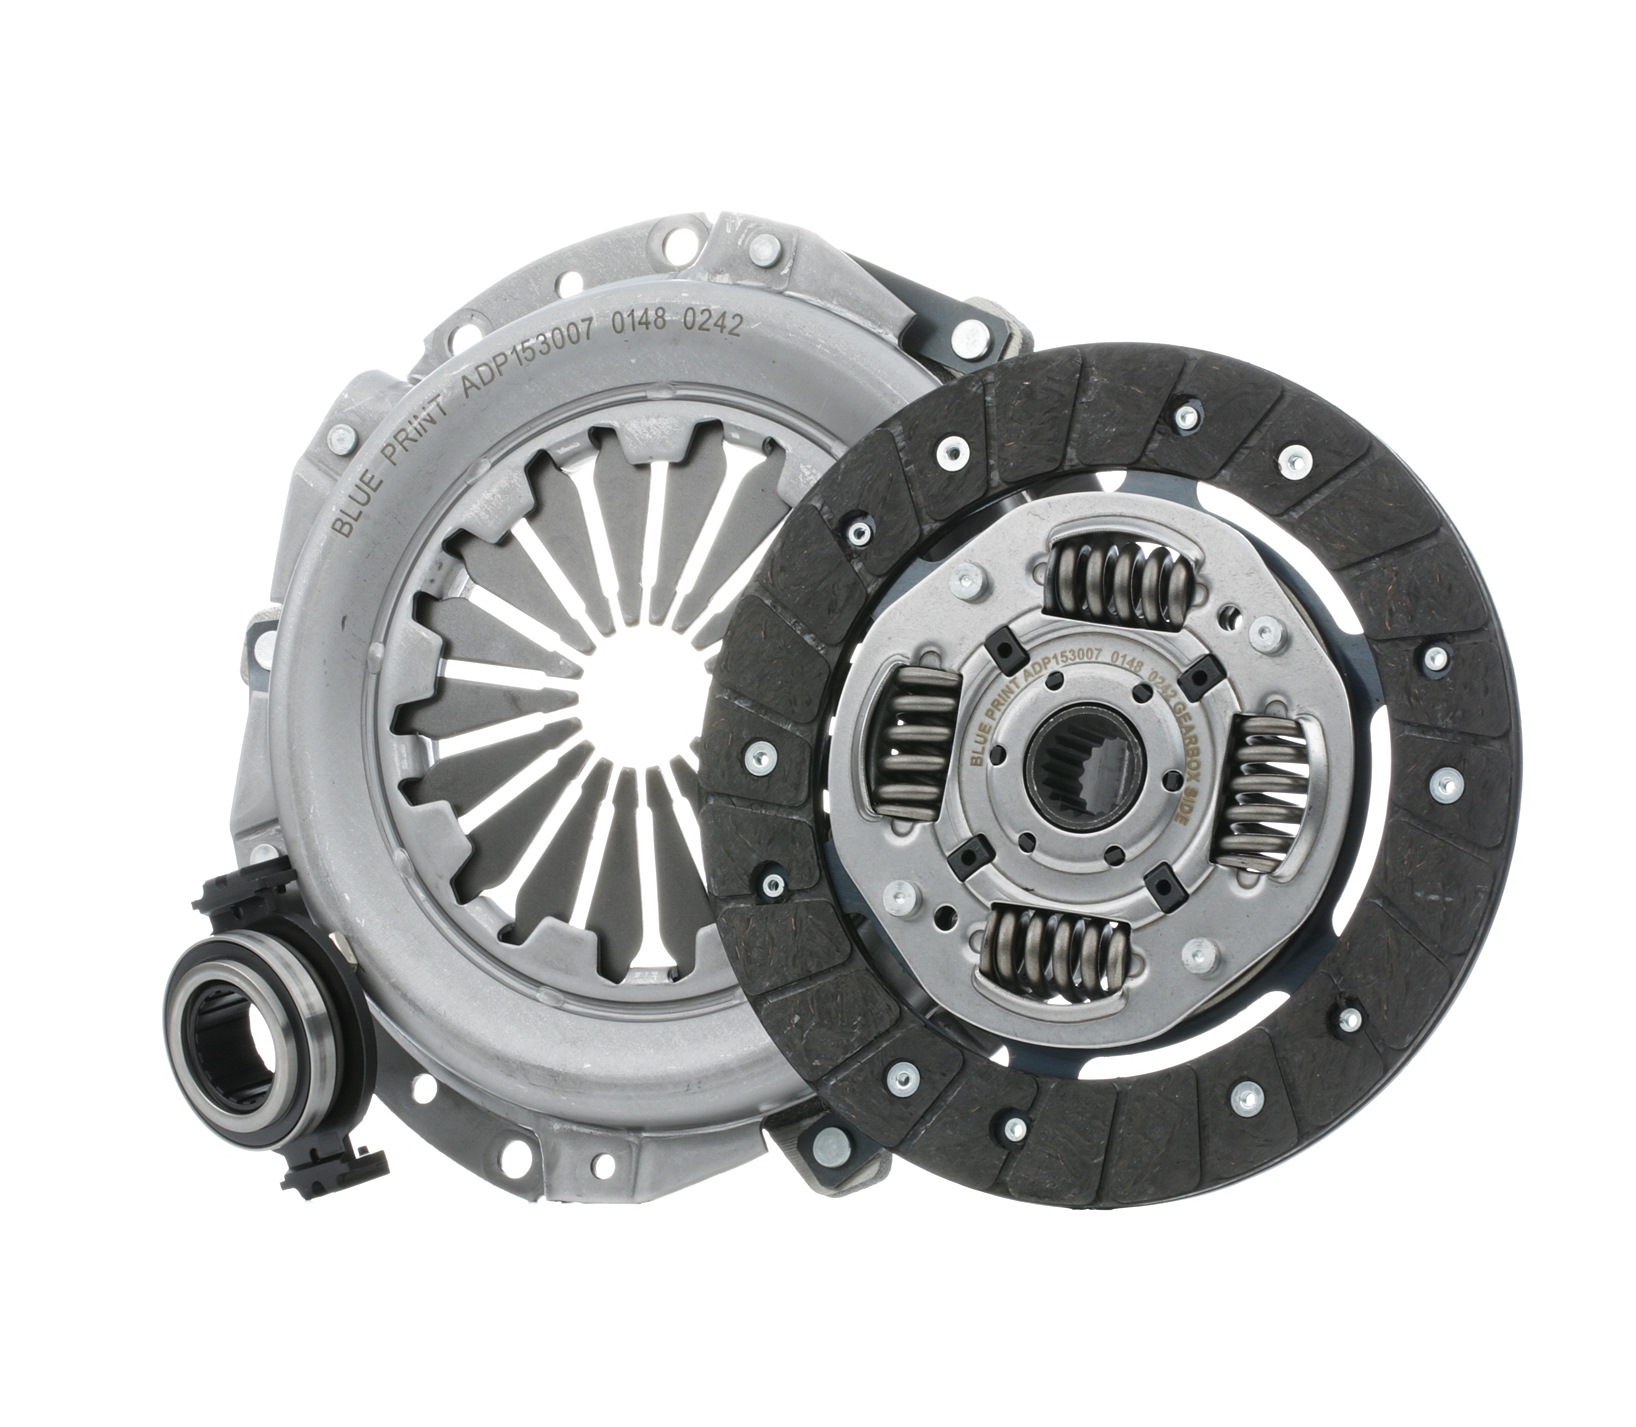 ADP153007 BLUE PRINT Clutch set IVECO three-piece, with synthetic grease, with clutch release bearing, 181mm